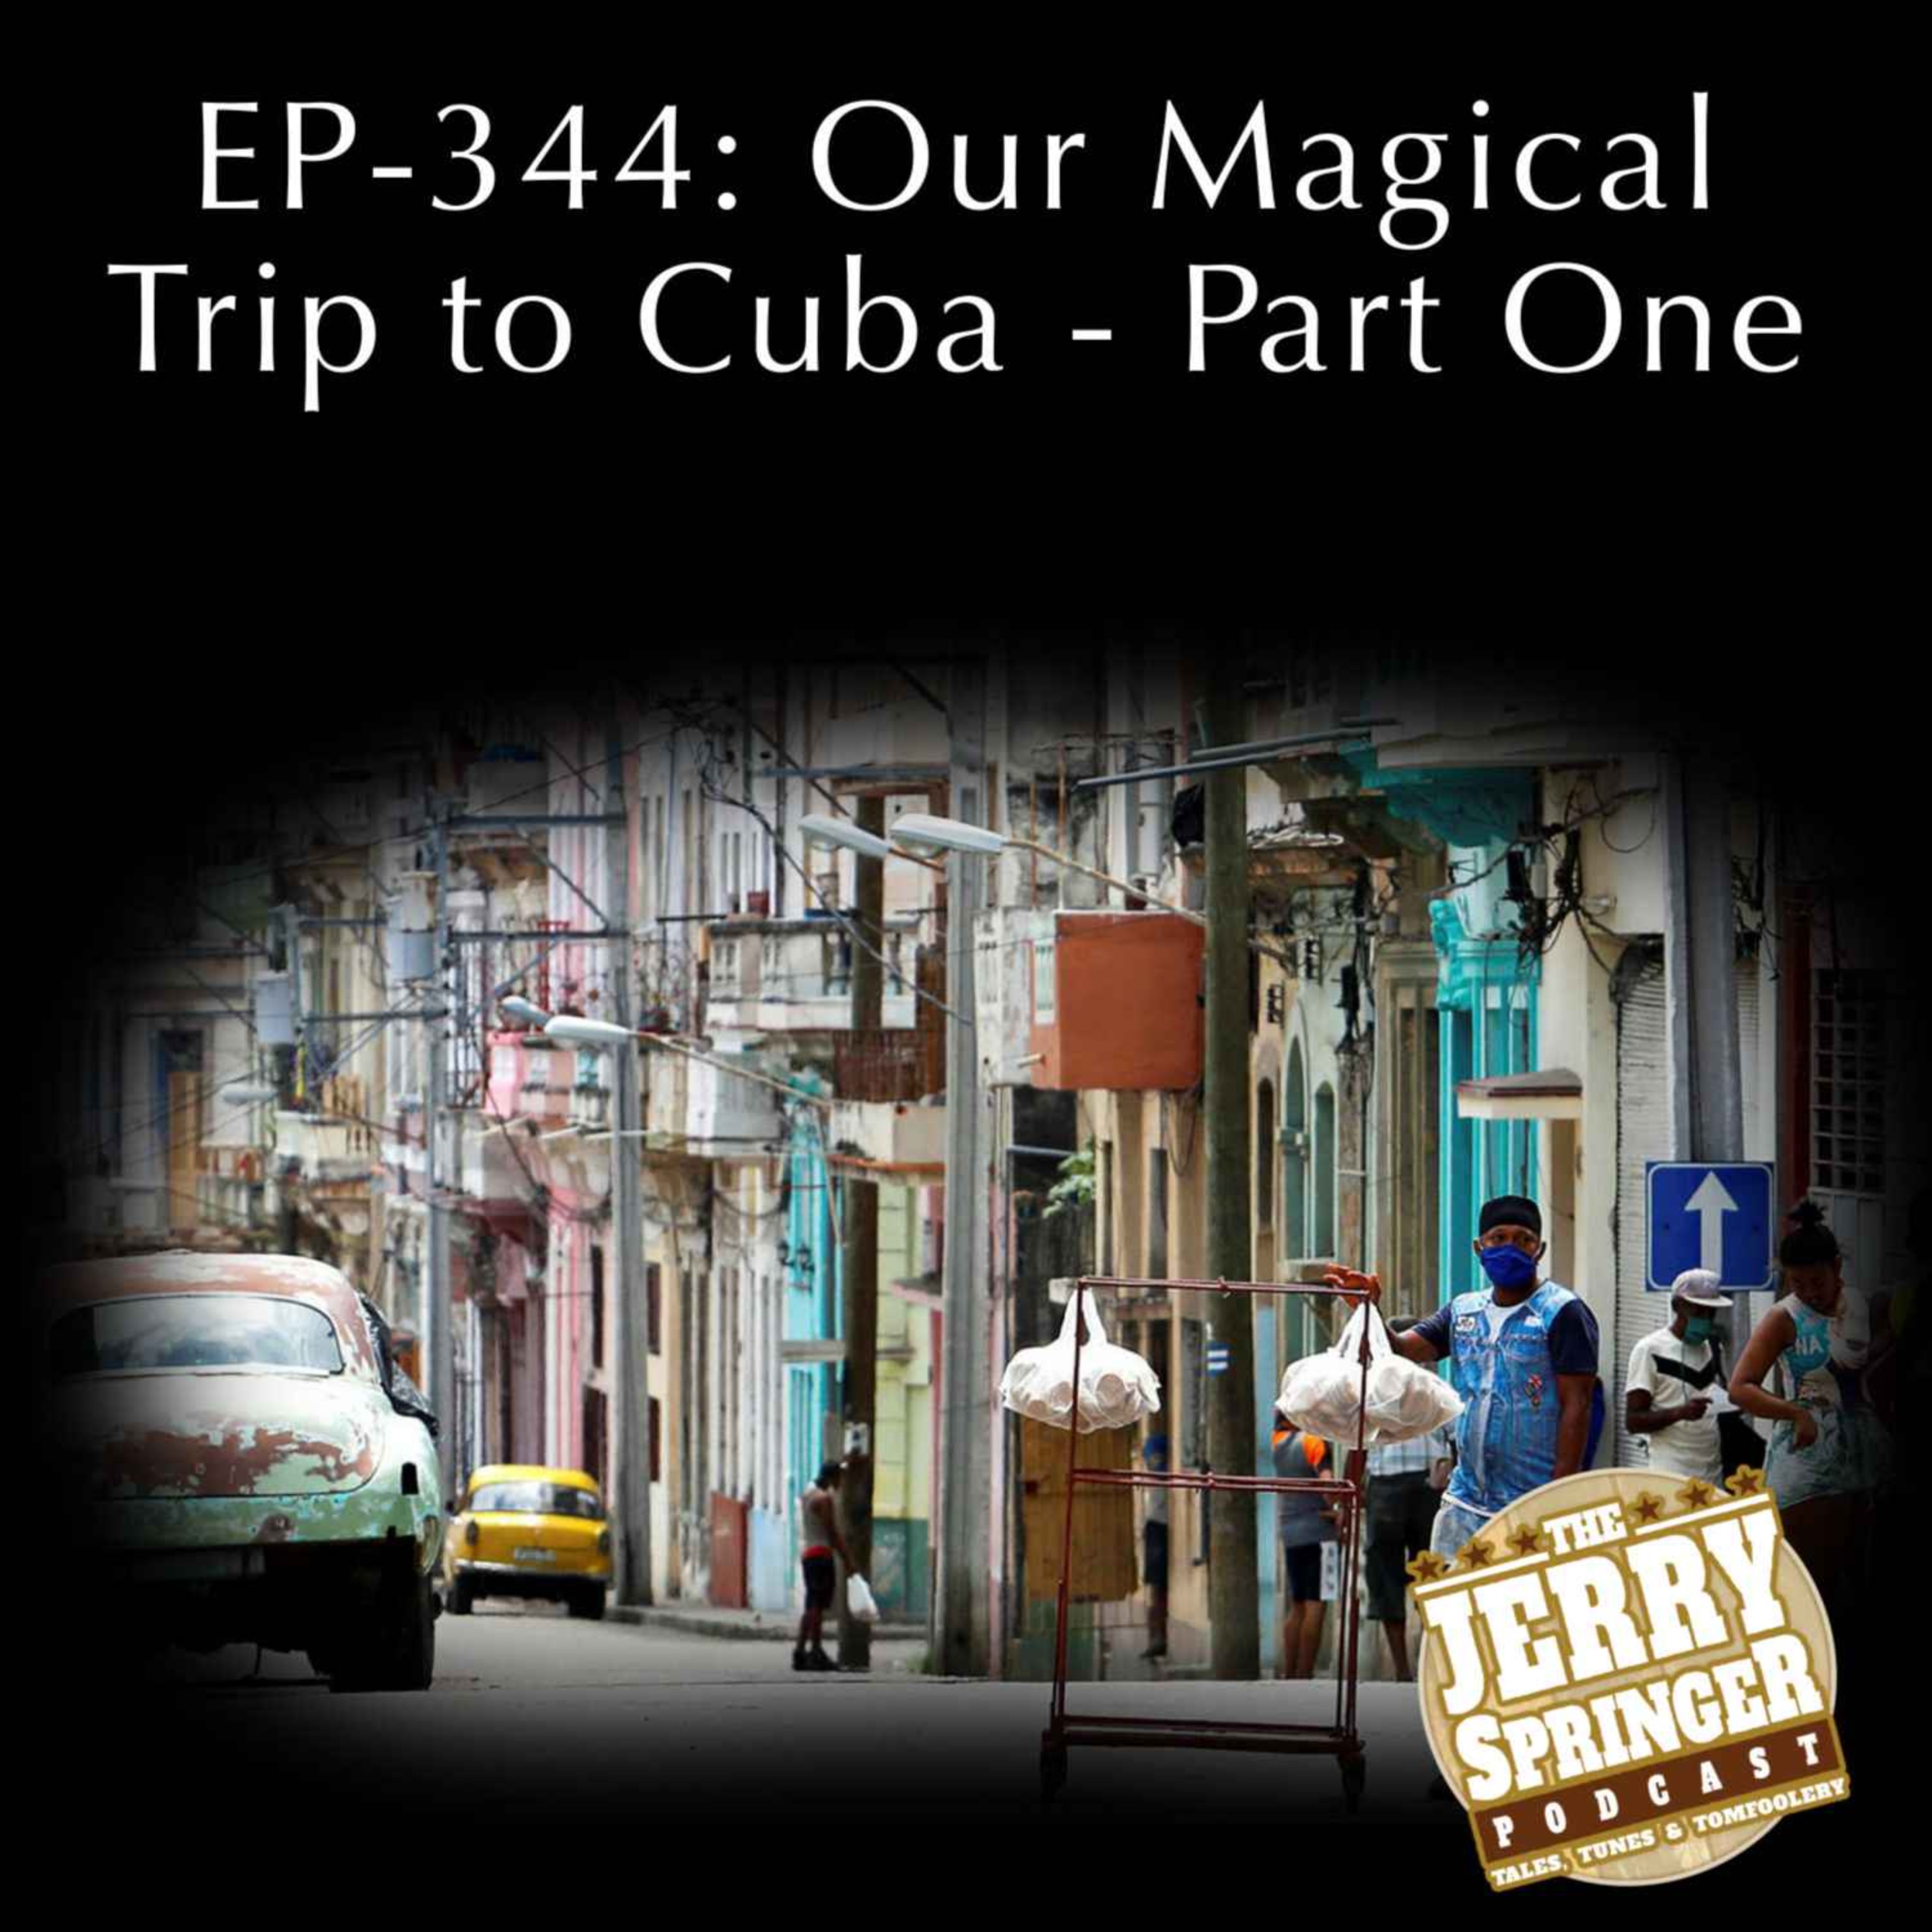 Our Magical Trip to Cuba - Part 1: EP - 344